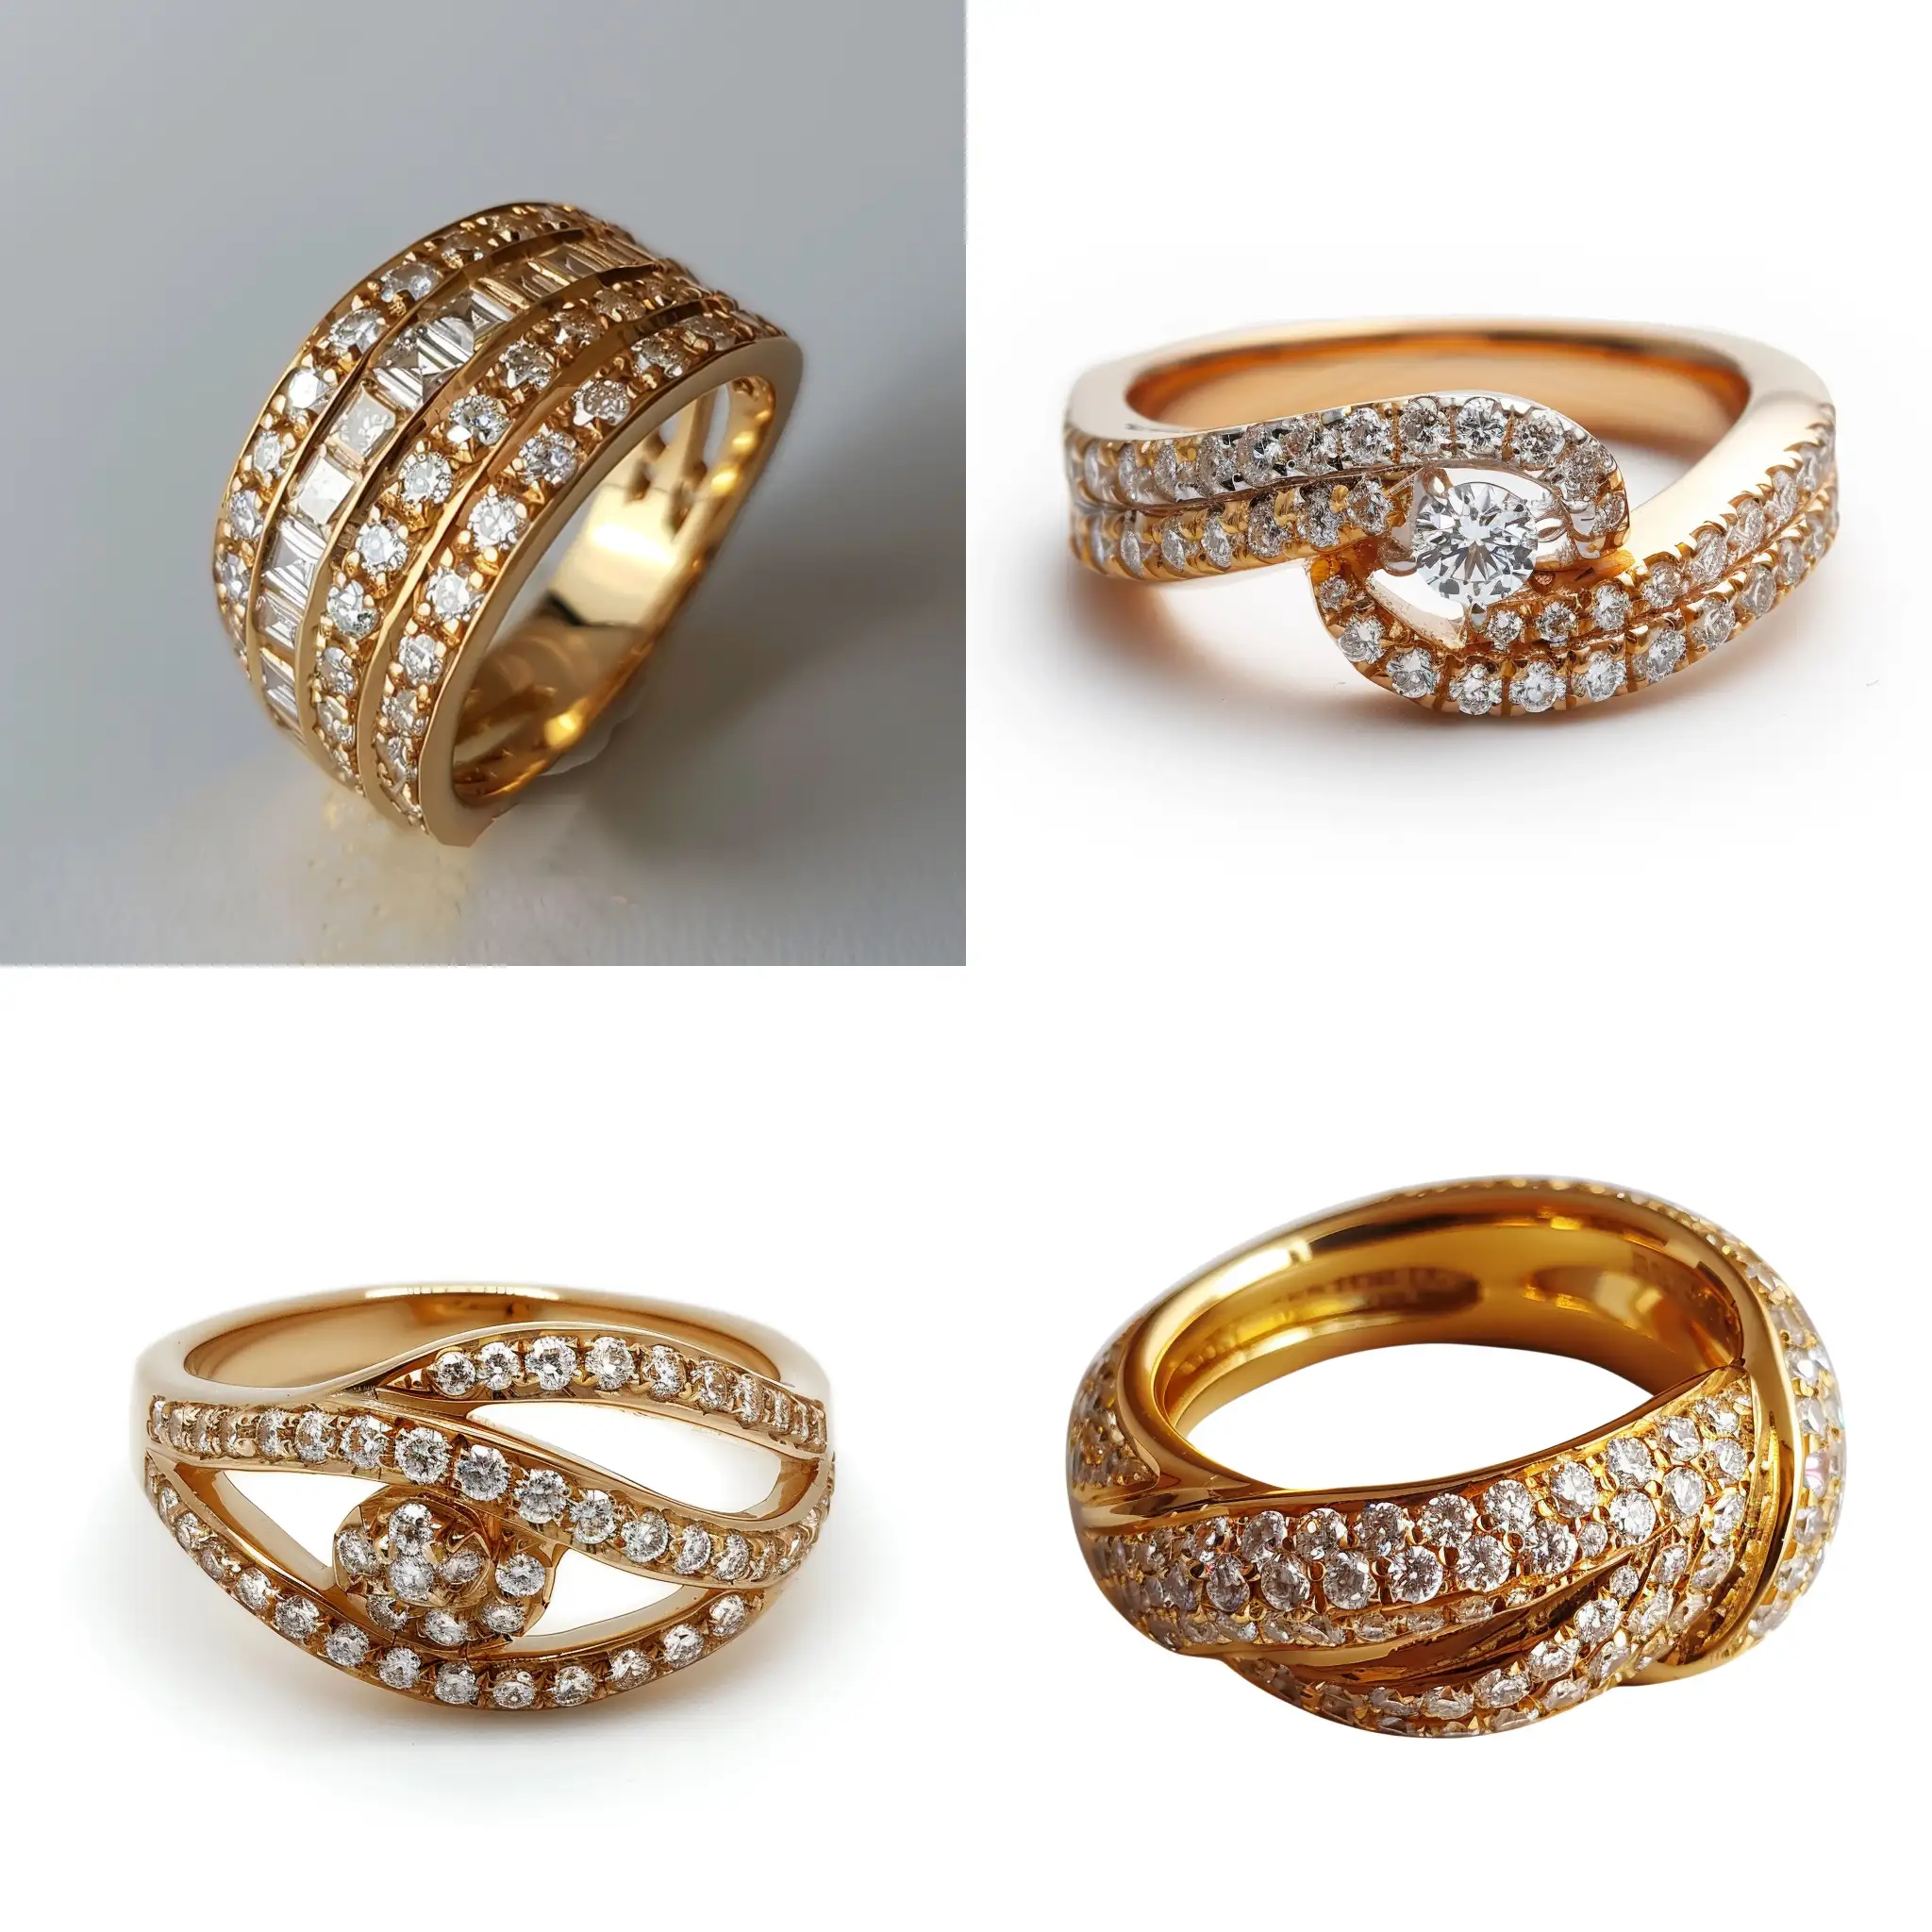 Ring in gold and diamonds Jacob and co style
